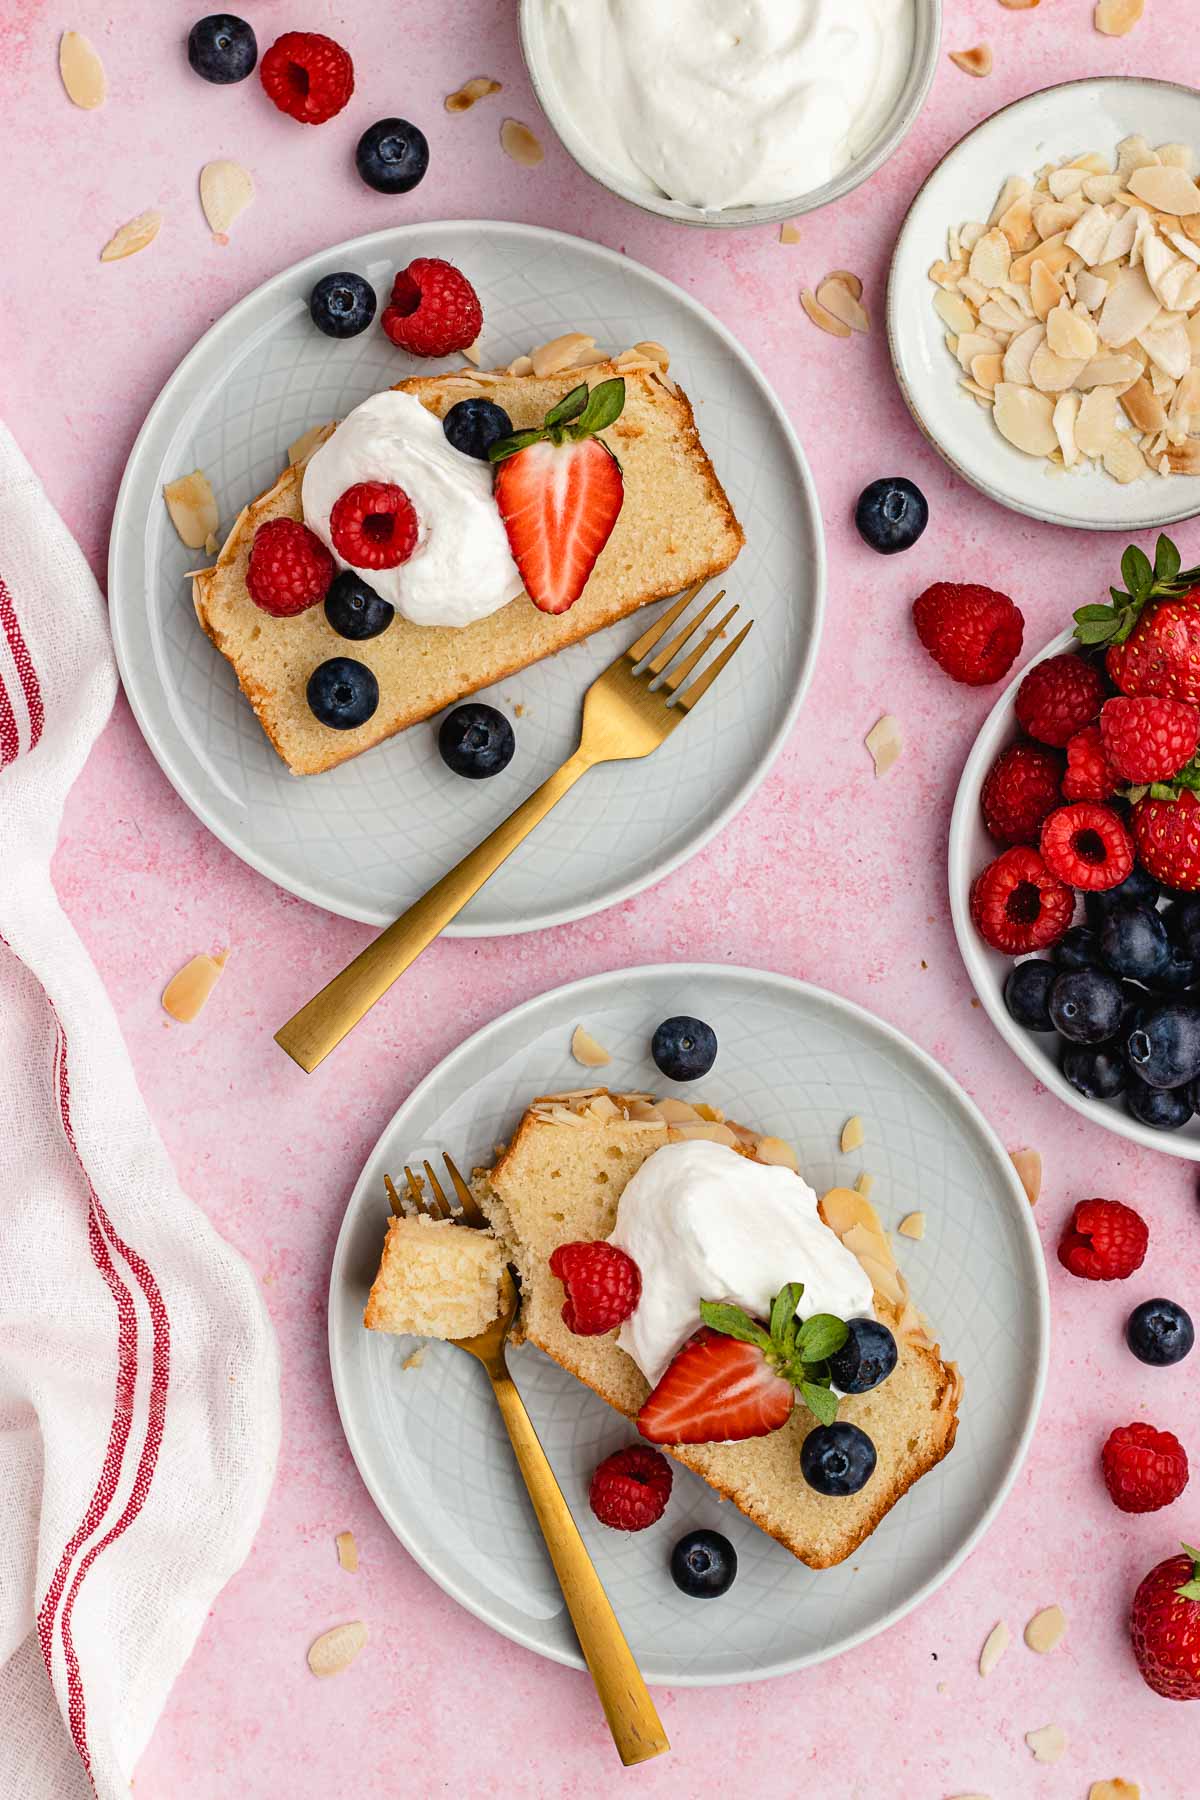 Almond Pound Cake slices on two plates with whipped cream and berries on top and forks.